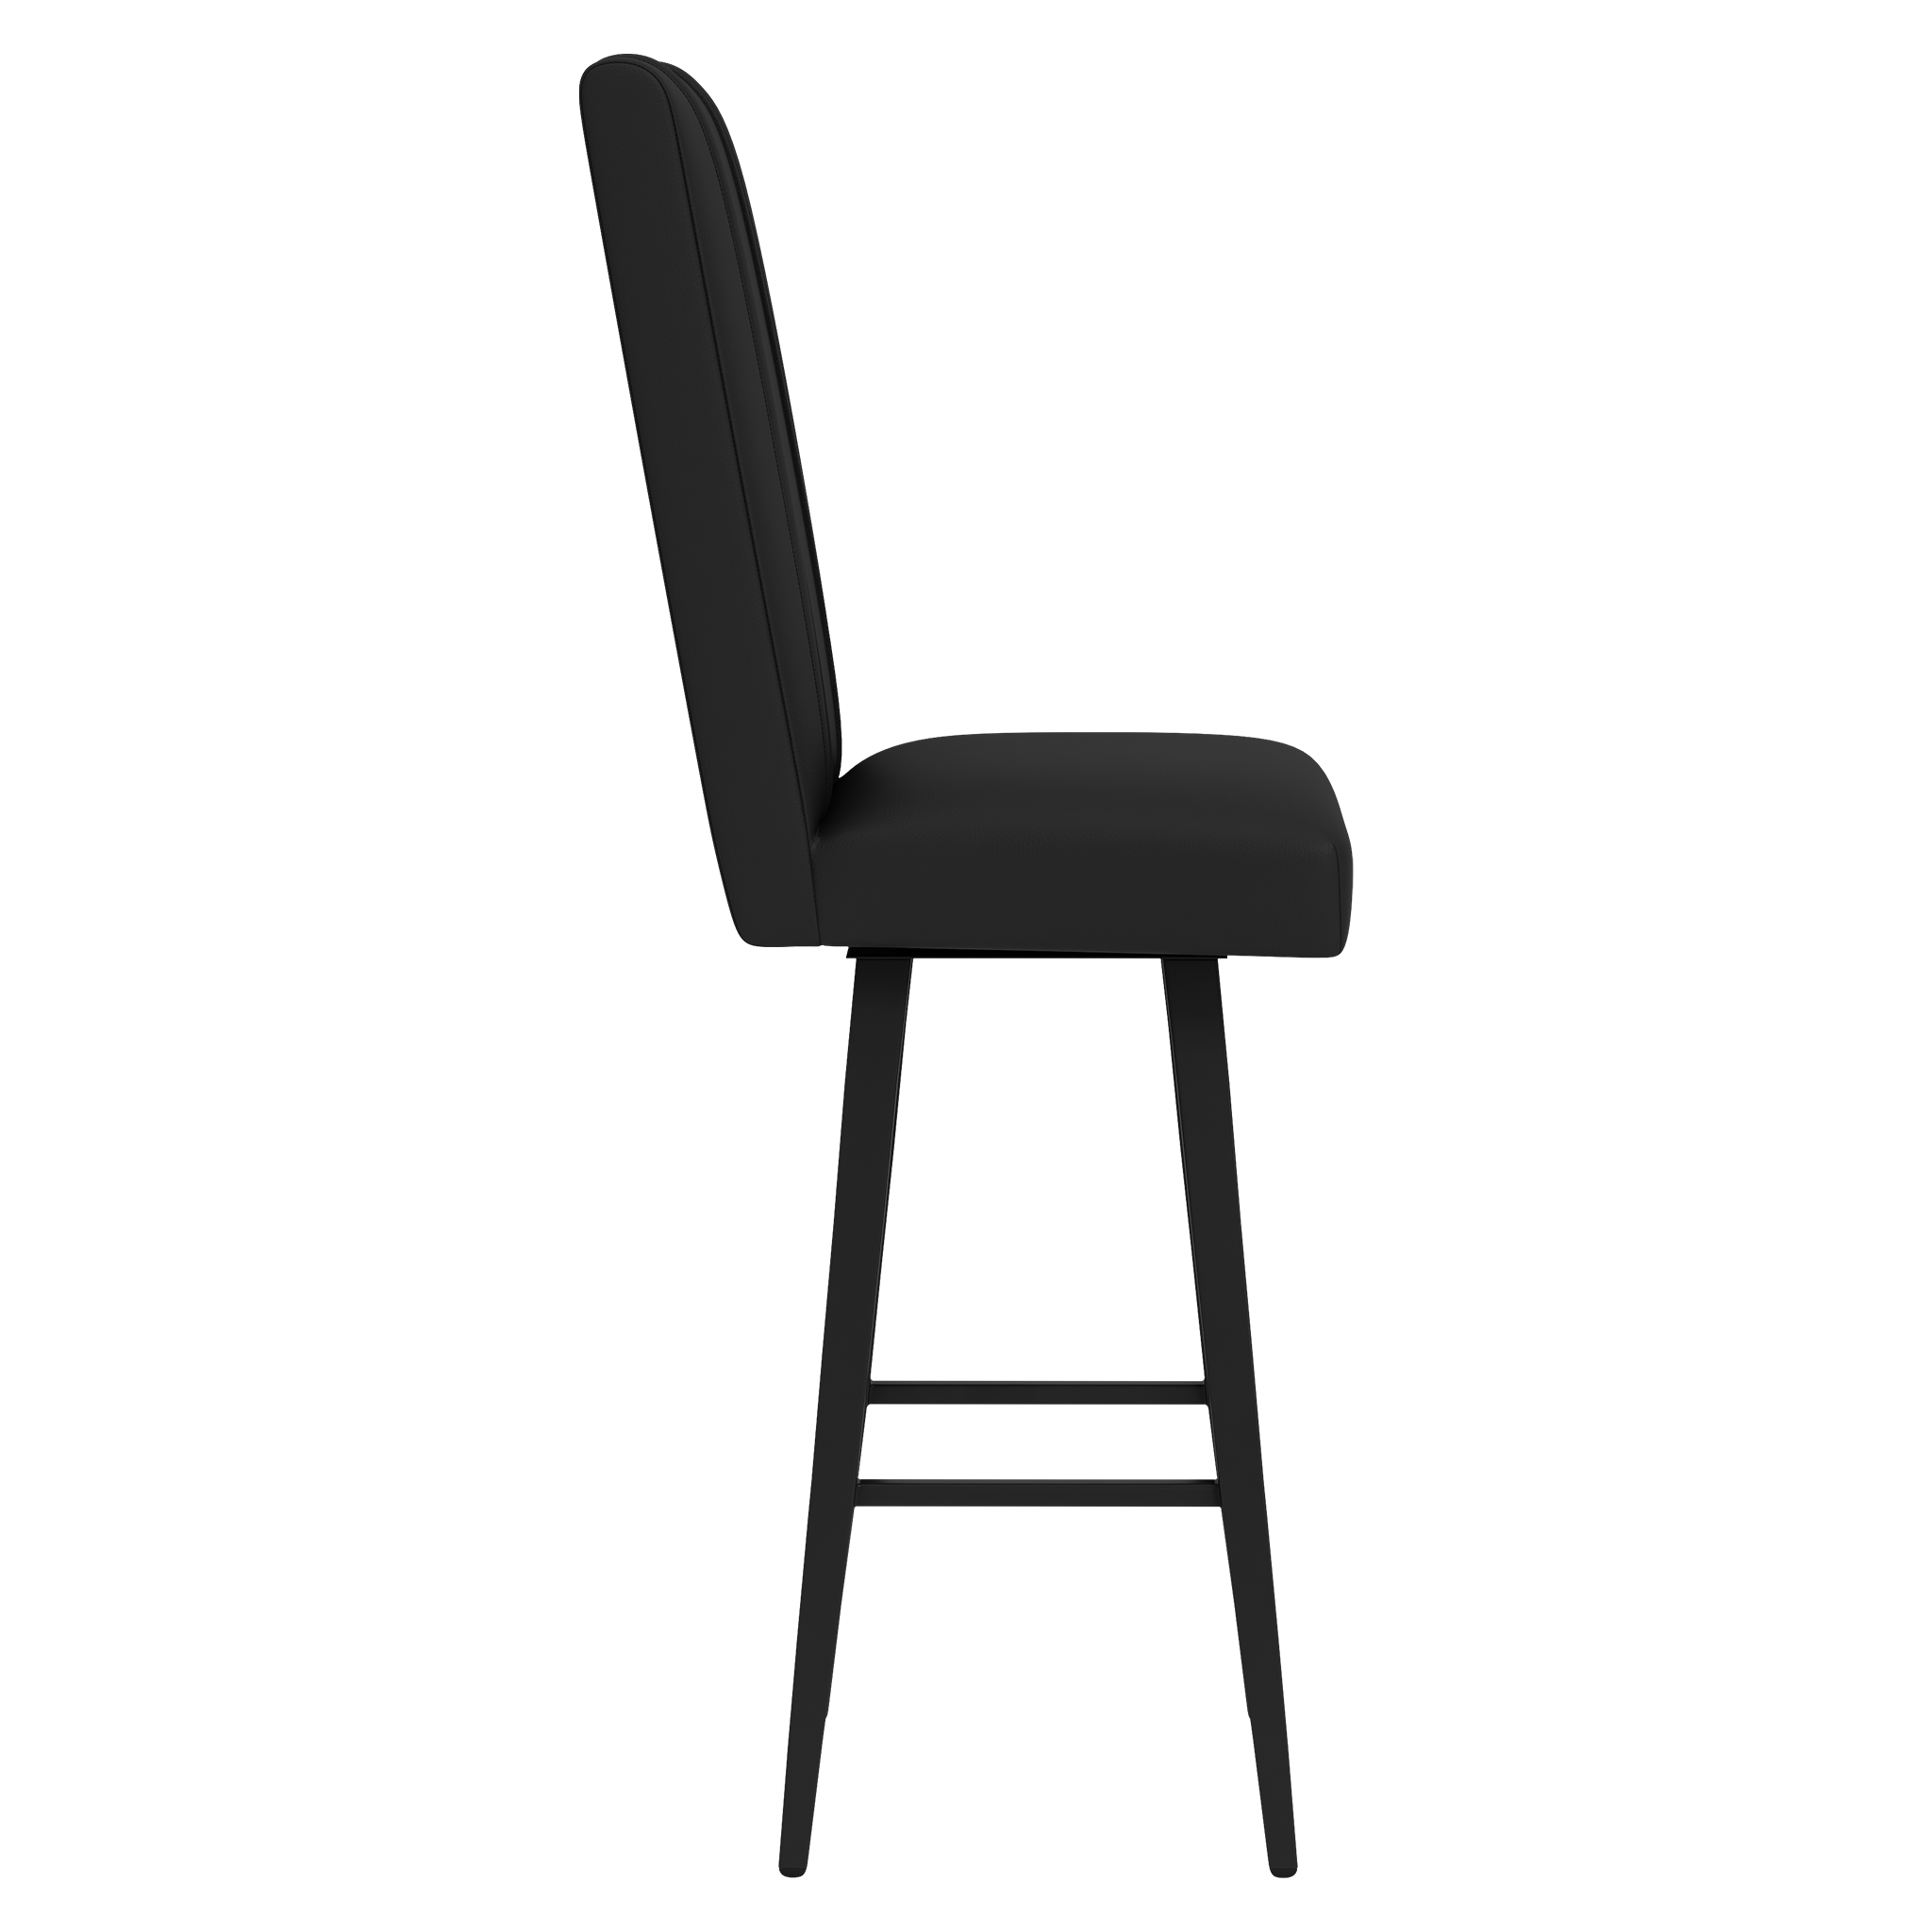 Swivel Bar Stool 2000 with Chicago White Sox Cooperstown Primary